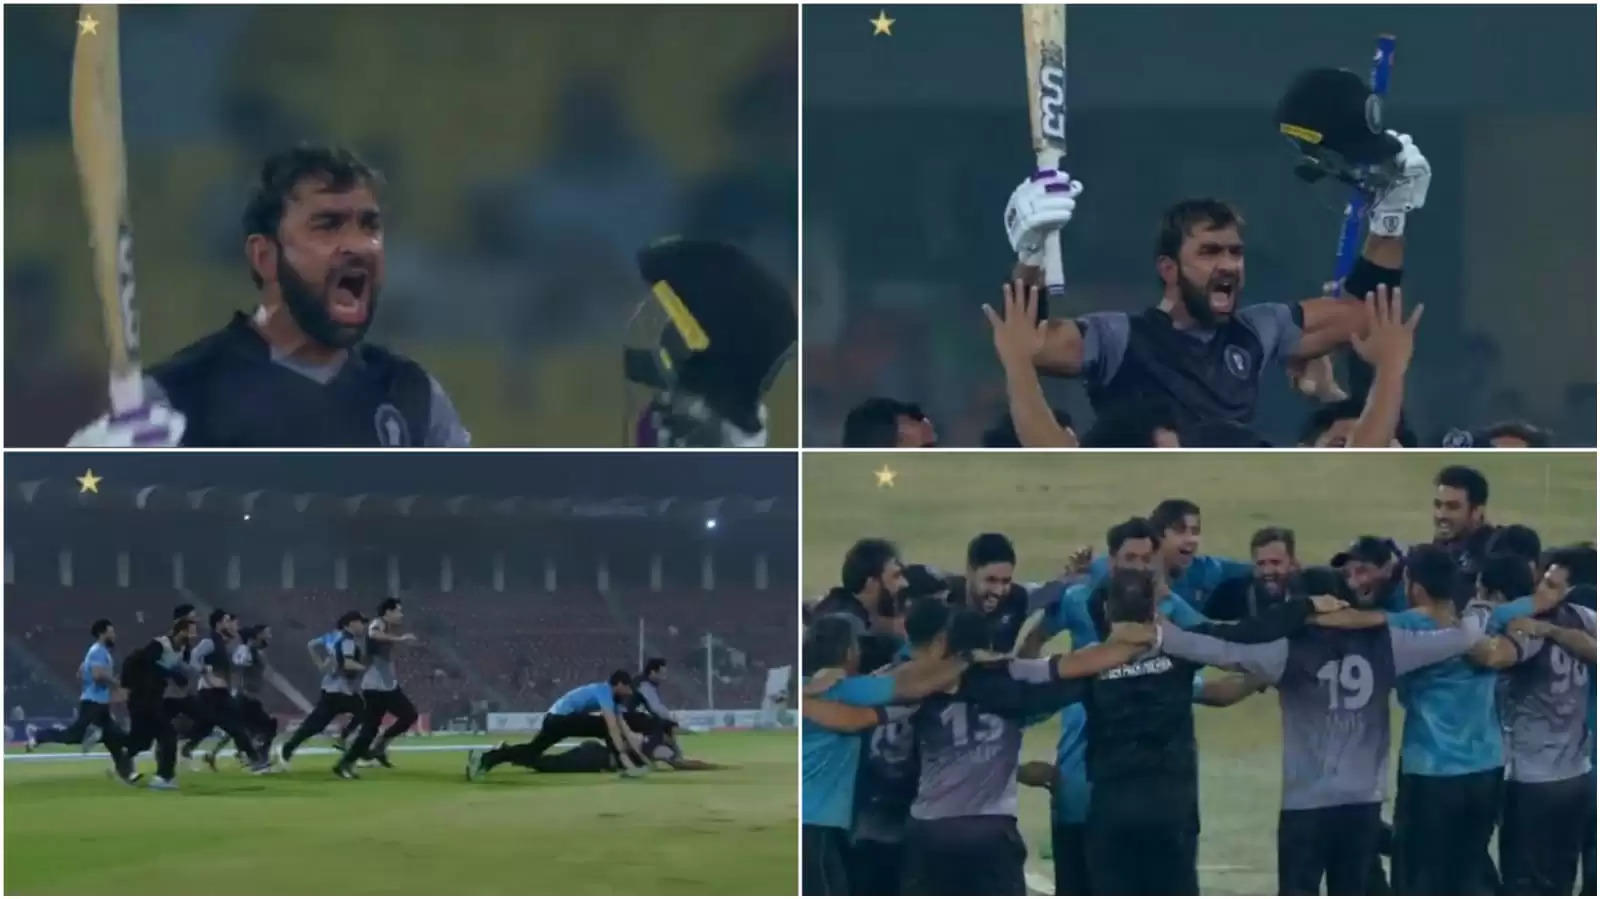 WATCH: The incredible emotions after National T20 Cup final in Pakistan